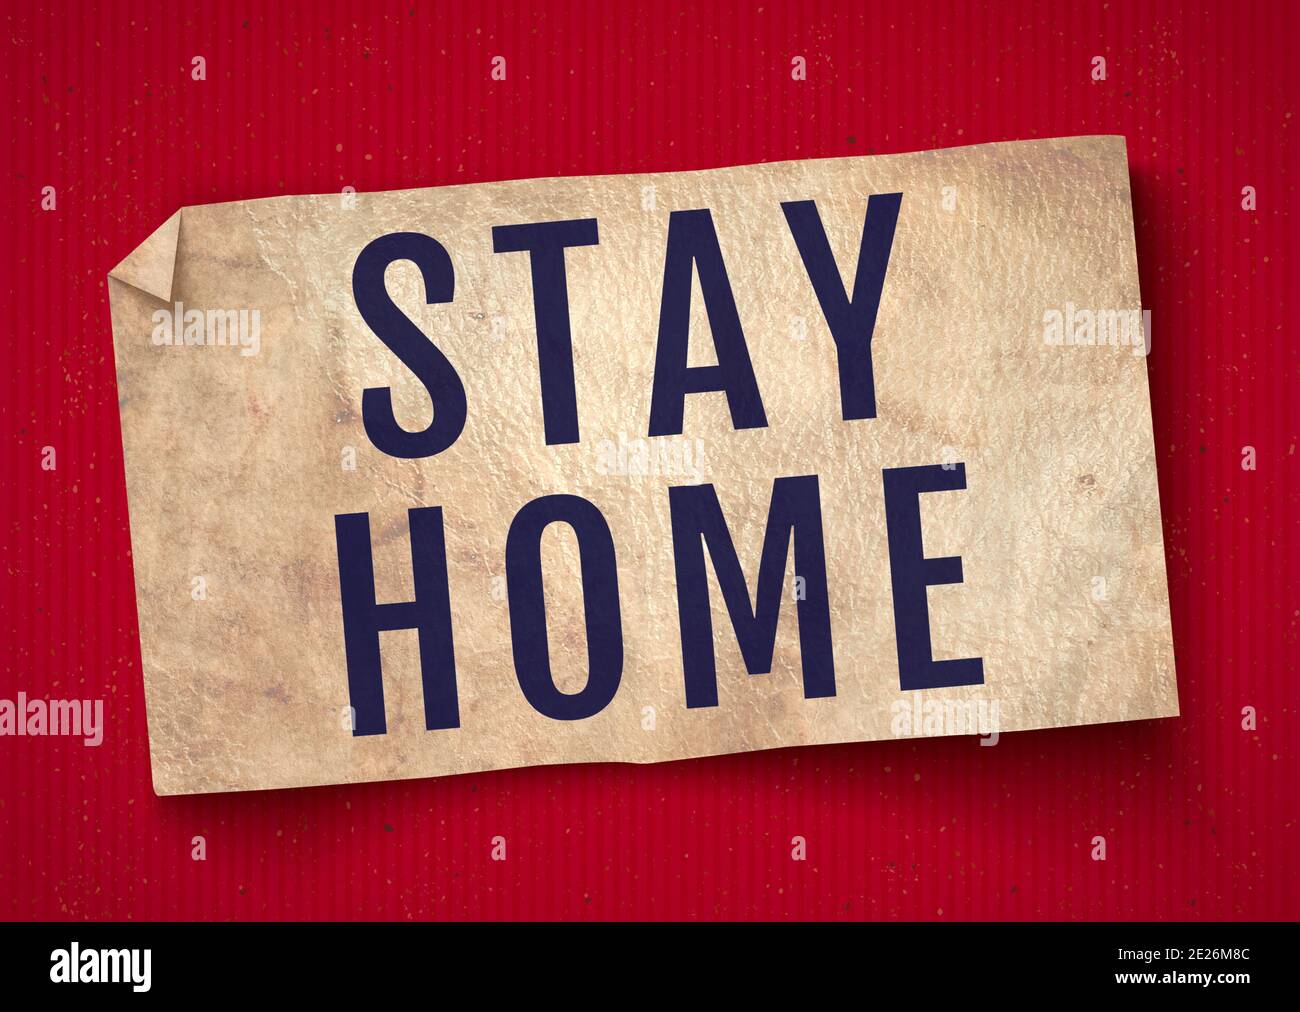 Illustration of a white paper texture with text of stay home on vintage cardboard background. Old white paper banner with stay home on red cardboard. Stock Photo